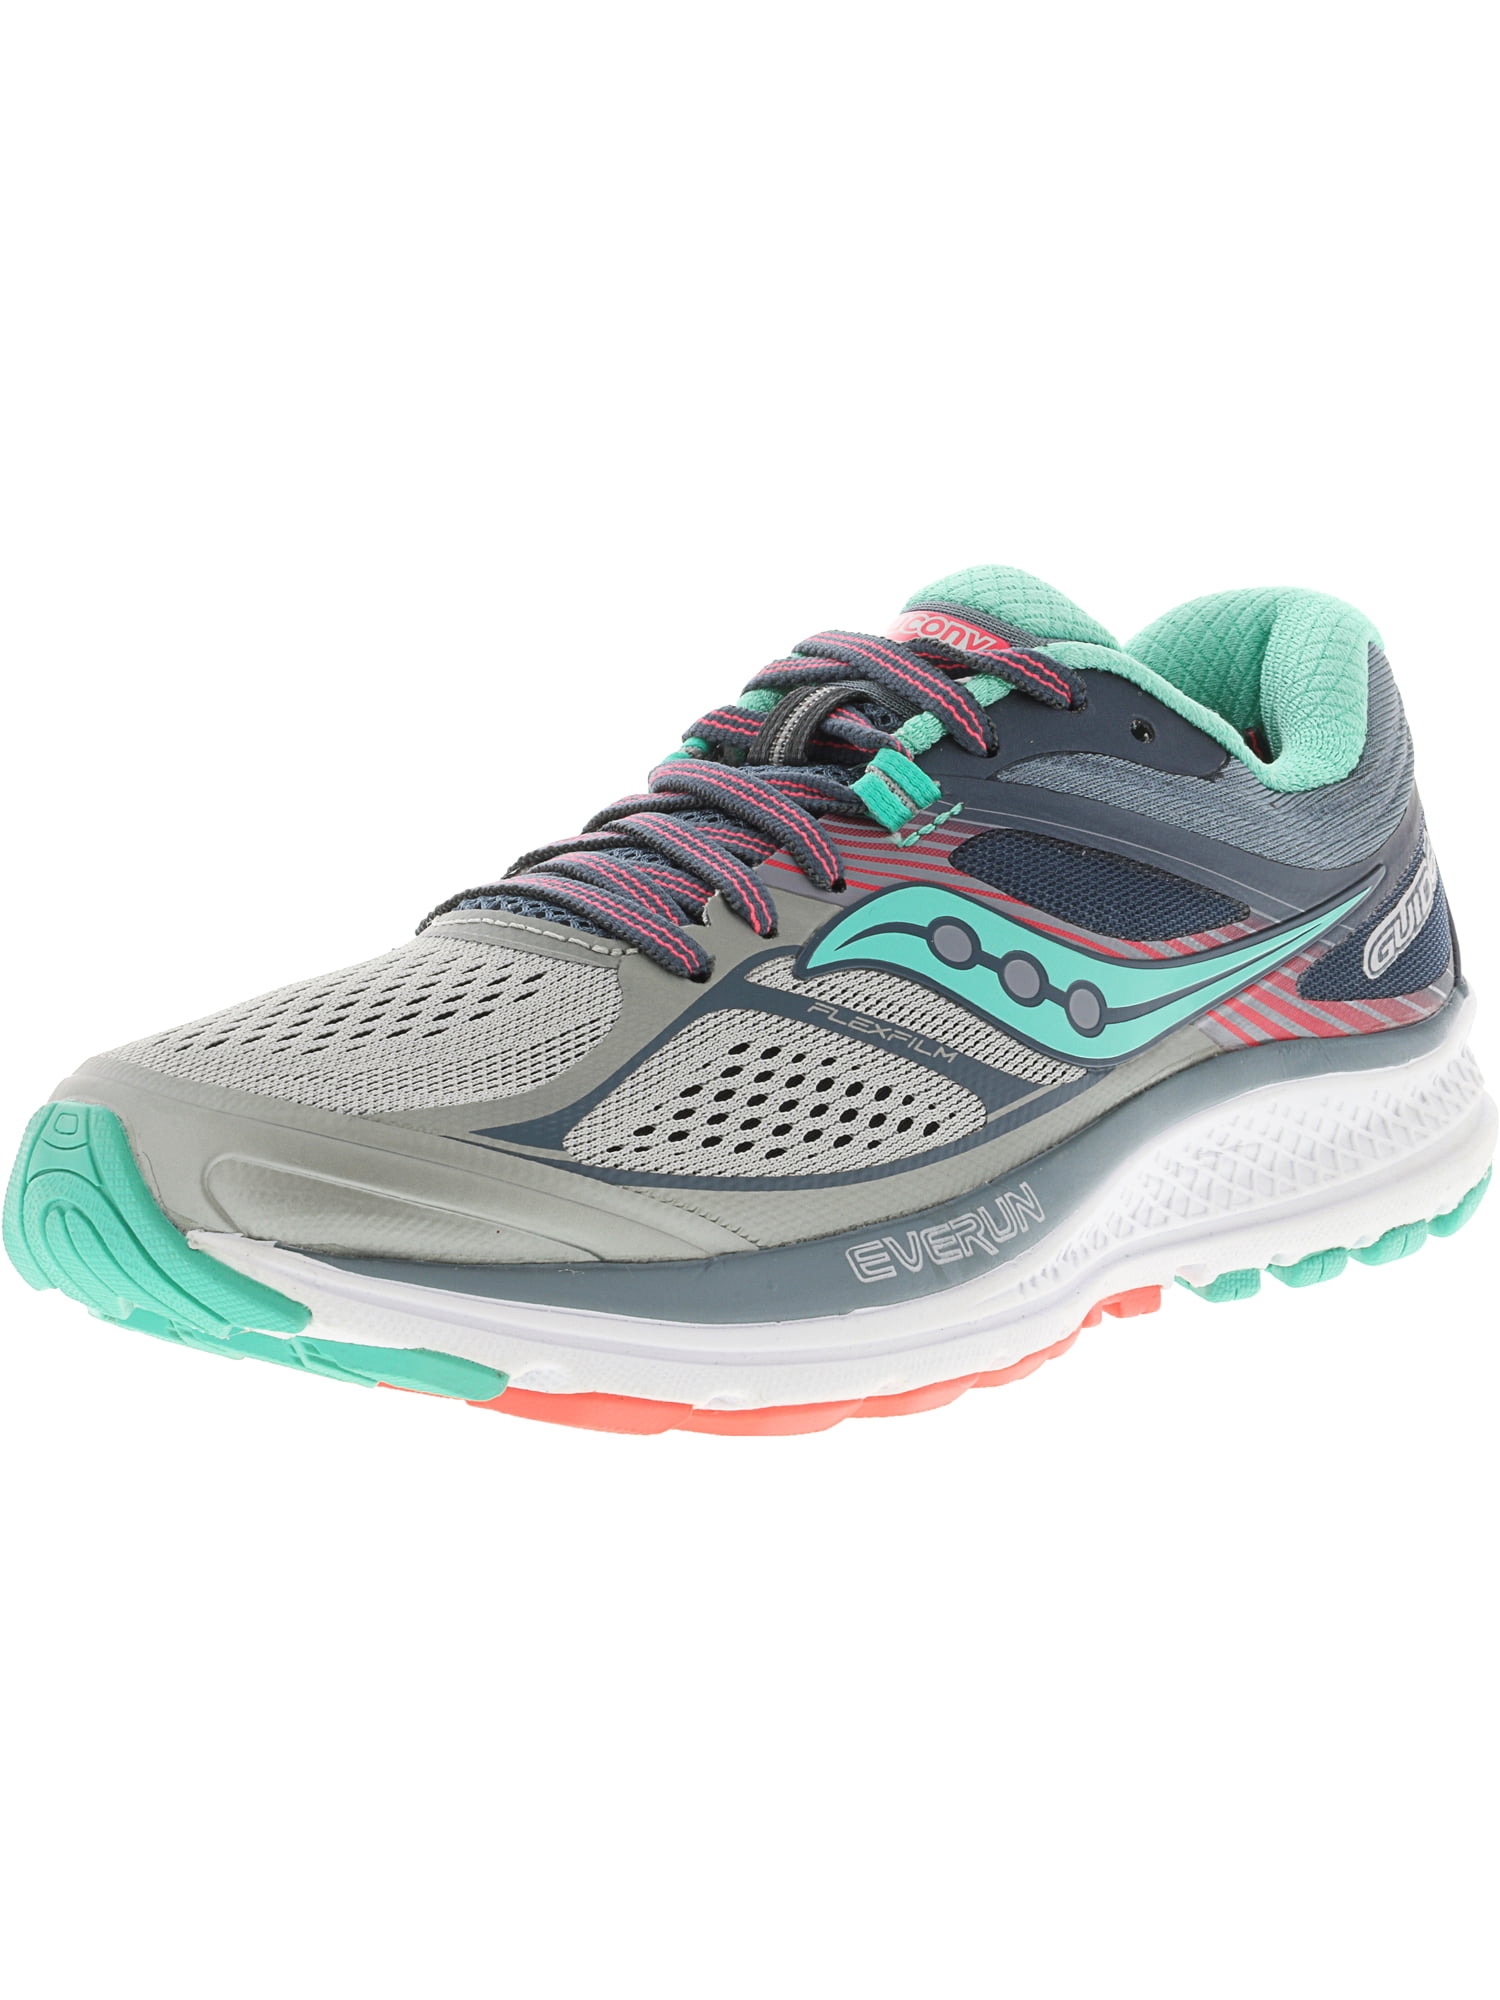 Grey / Teal Ankle-High Running Shoe 